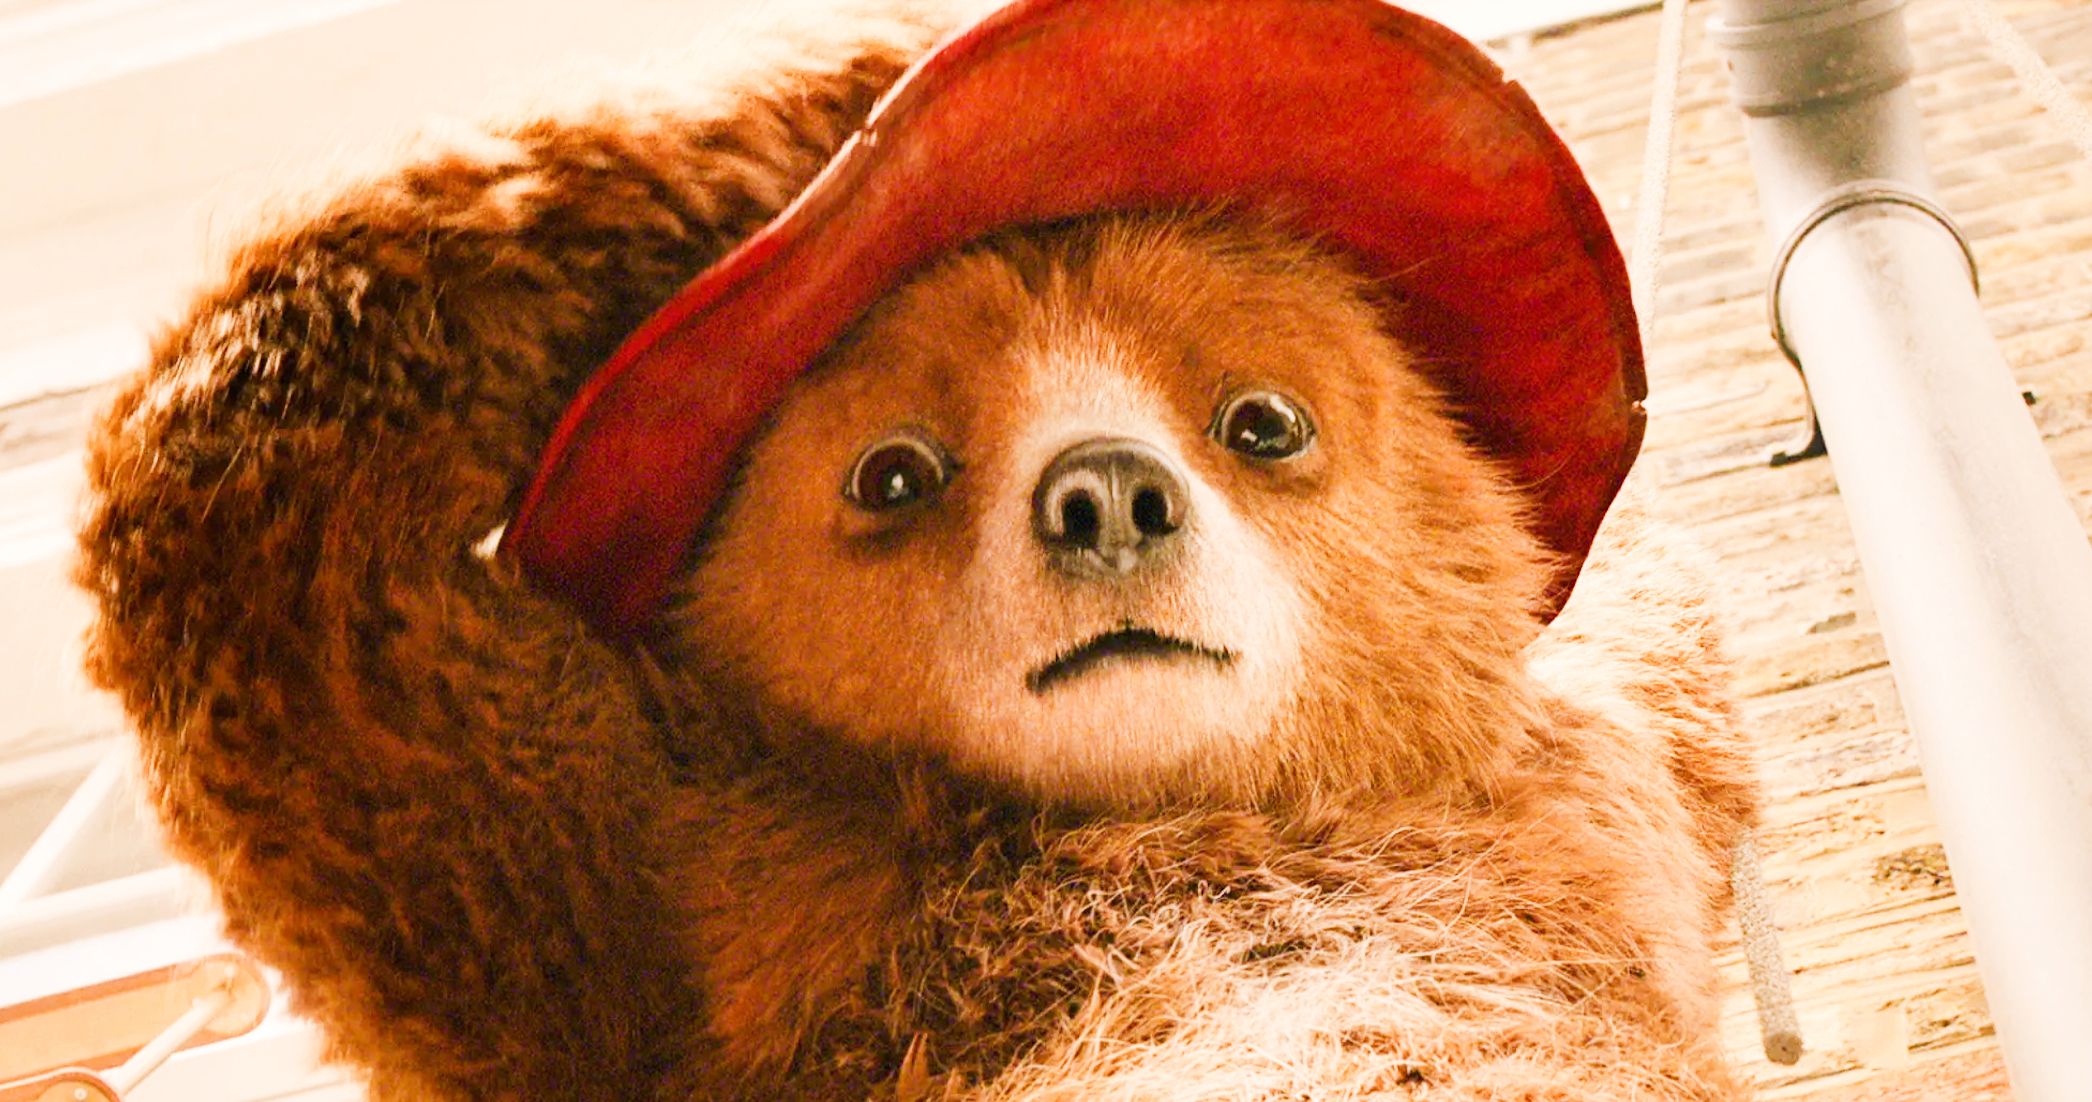 Paddington 2 Loses Top Spot at Rotten Tomatoes After New Negative Review Emerges